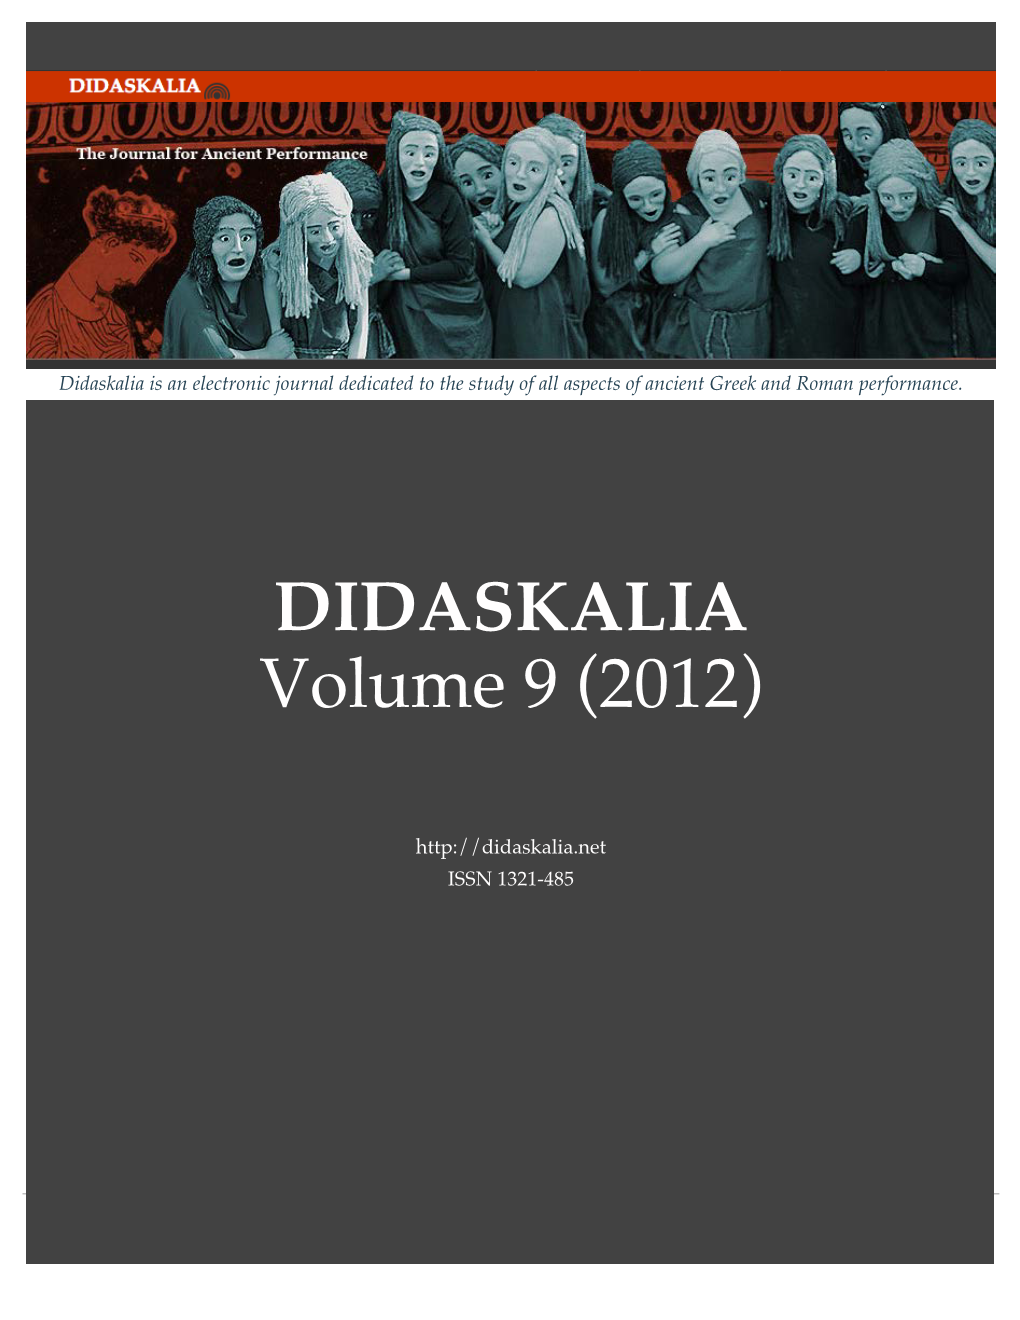 PDF of Entire Volume (110Pp, 3MB)